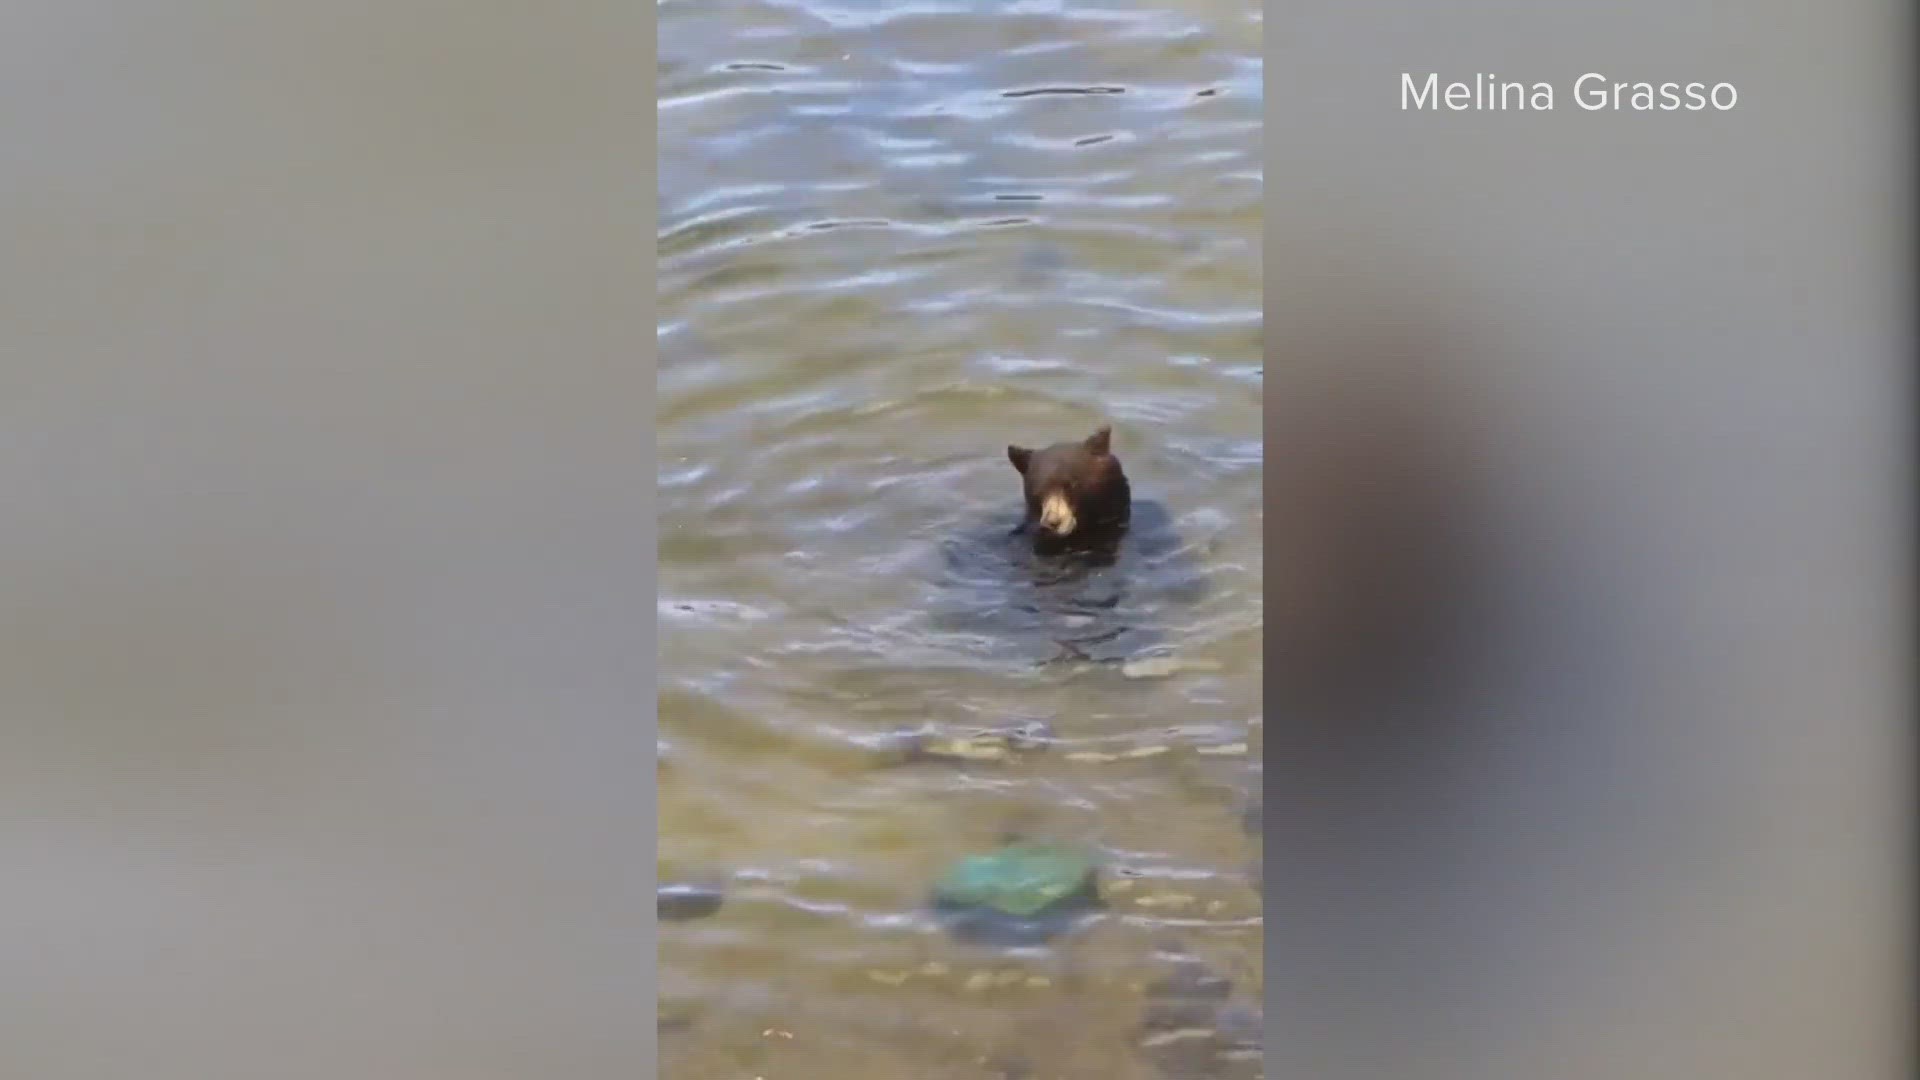 A South Lake Tahoe bear went for a swim Monday, taking a dip to get away from the heat.